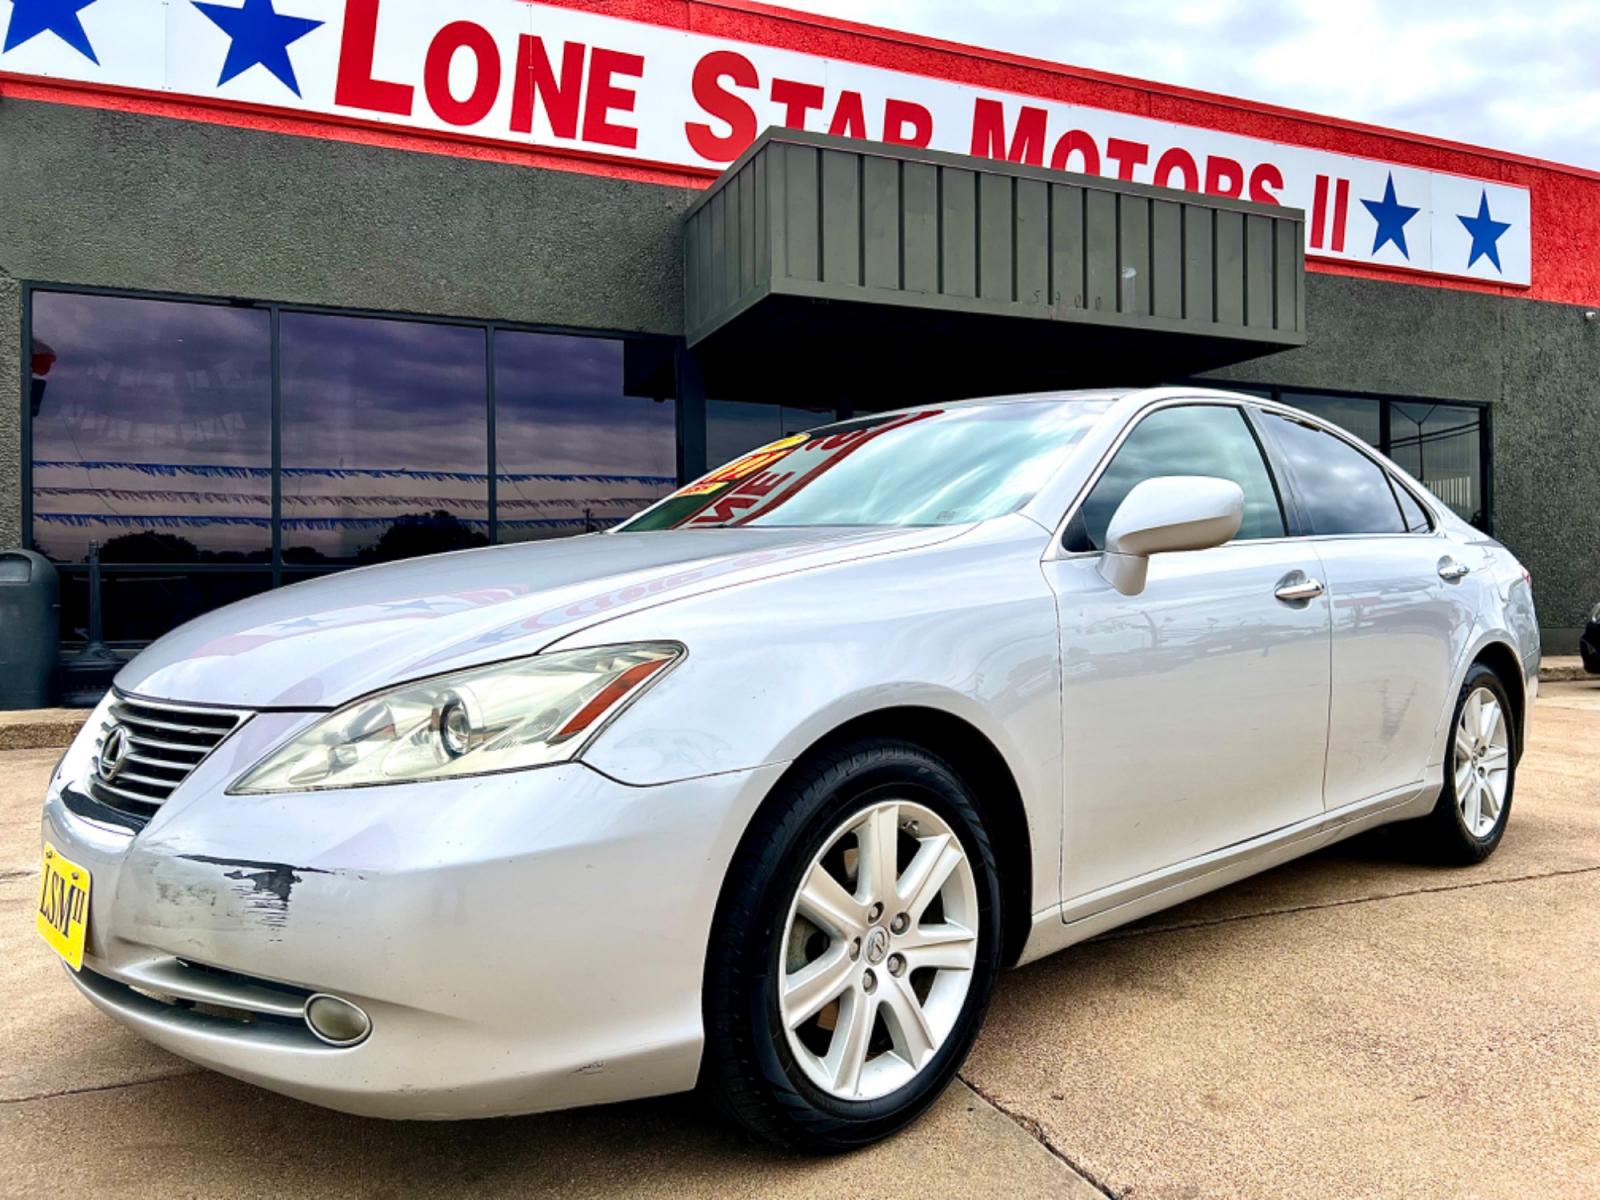 2007 SILVER LEXUS ES 350 BASE (JTHBJ46G072) , located at 5900 E. Lancaster Ave., Fort Worth, TX, 76112, (817) 457-5456, 0.000000, 0.000000 - CASH CAR ONLY, NO FINANCING AVAILABLE. THIS 2007 LEXUS ES 350 BASE 4 DOOR SEDAN RUNS AND DRIVES GREAT. IT IS EQUIPPED WITH A CD PLAYER, AM/FM RADIO AND AN AUX PORT. THE TIRES ARE IN GOOD CONDITION AND STILL HAVE TREAD LEFT ON THEM. THIS CAR WILL NOT LAST SO ACT FAST! Call or text Frances at 68 - Photo #1